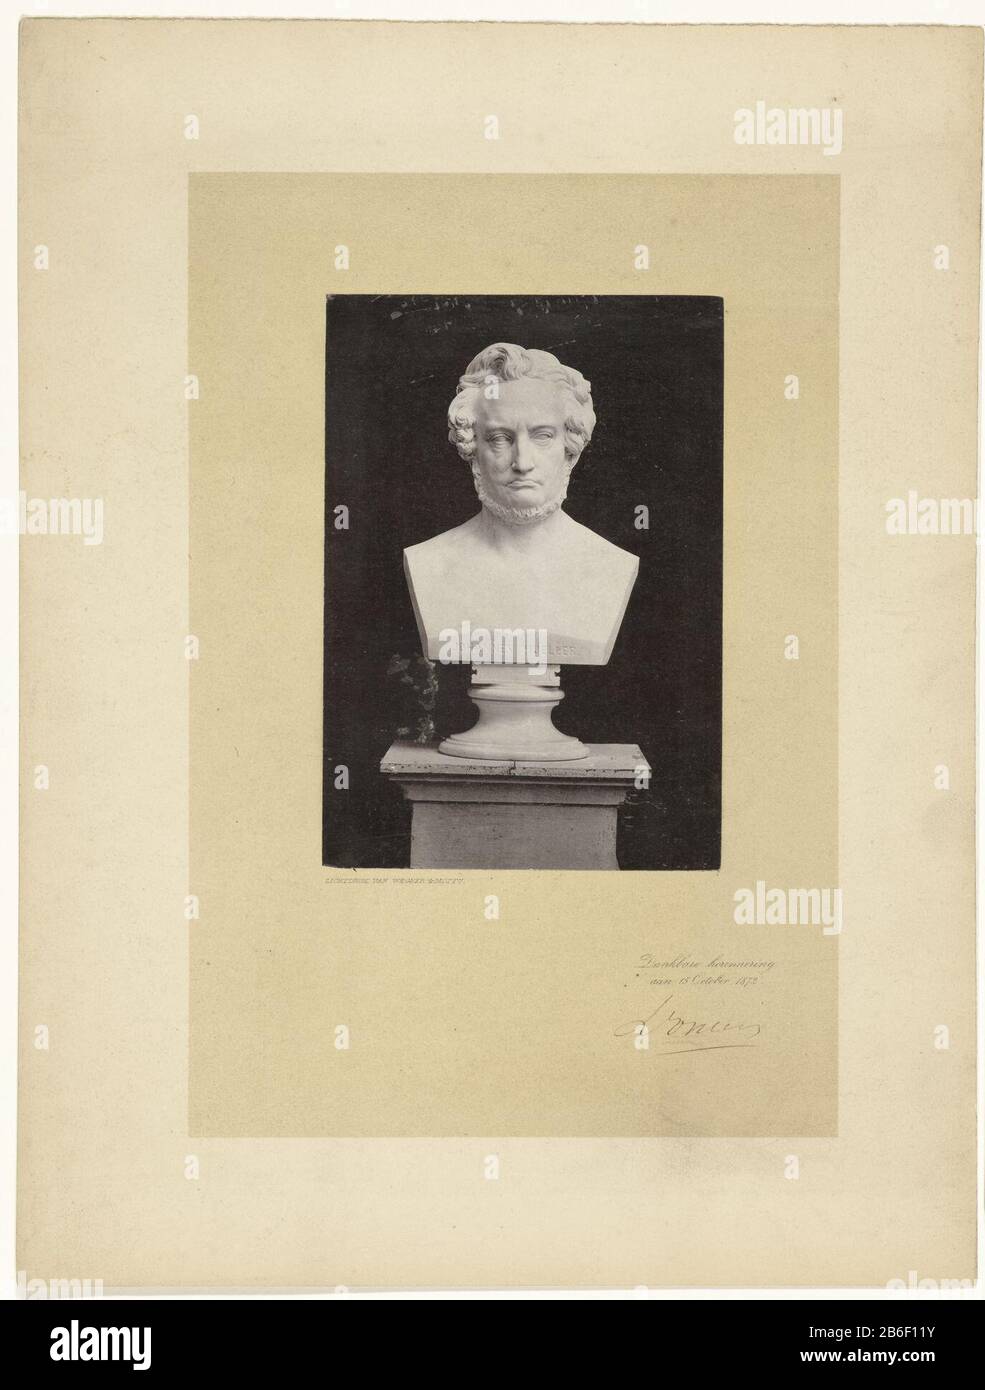 Bust of Johannes Müller Object Type: photographs Item number: RP-F 1994-57 Inscriptions / Brands: signature and date lower left, printed: 'Lichtdruk Wegner & Mottu.'annotatie, lower right, printed:' Grateful remembrance on October 15 18721872' Manufacturer : photographer: Wegner & Mottu (listed building) photographer: Louis Wegnerfotograaf: Pierre Alexis Mottudrukker: Wegner & Mottu (attributed to) Place manufacture: Amsterdam Date: 1872 Physical features: copying material: paper carton Technique: light pressure measurements: photo : h 145 mm × W 100 mmblad: h 320 mm × W 243 mm Subject: scienc Stock Photo